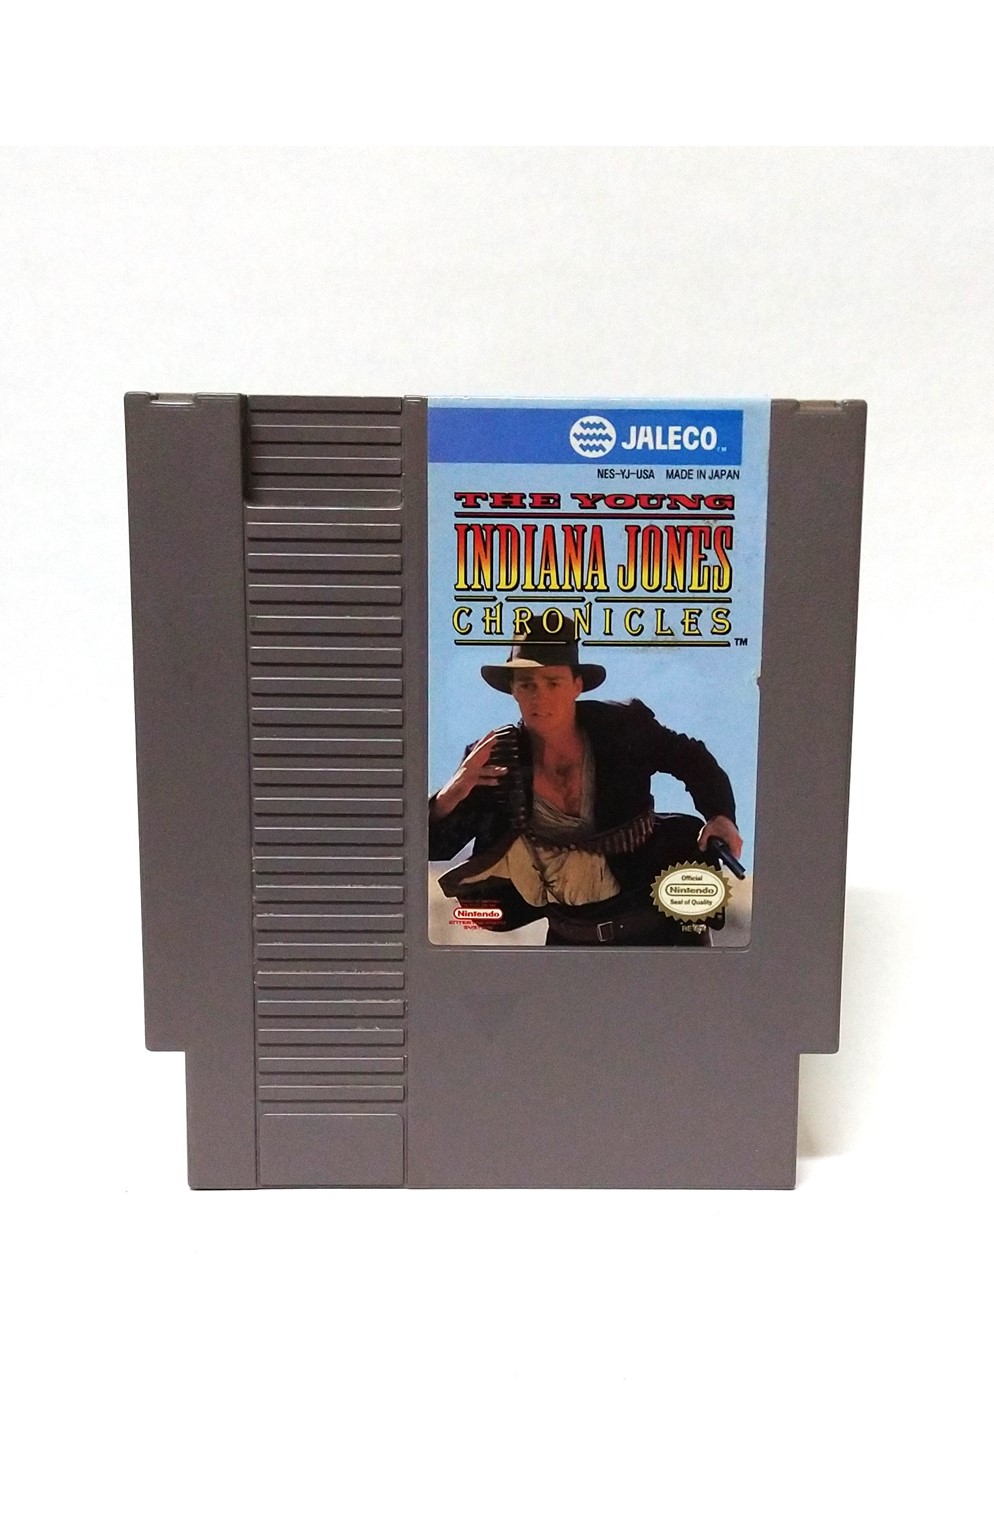 Nintendo Nes The Young Indiana Jones Chronicles Cartridge Only (Very Good)